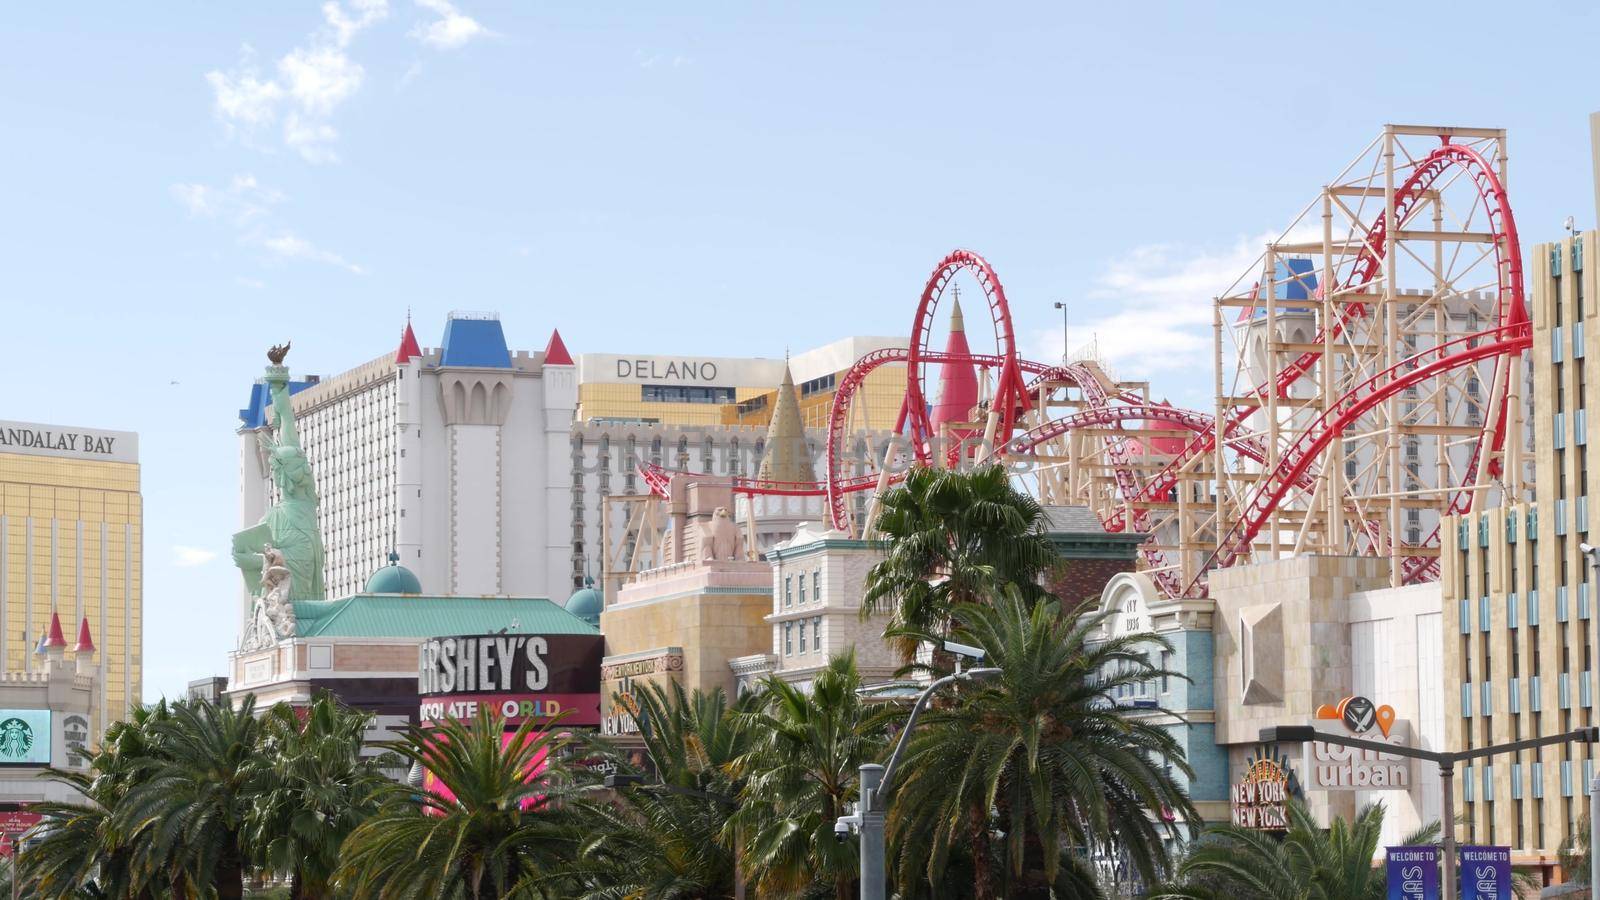 LAS VEGAS, NEVADA USA - 7 MAR 2020: The Strip boulevard with luxury casino and hotels in gambling sin city. Road to Fremont street in tourist money playing resort. New York-New York and roller coaster